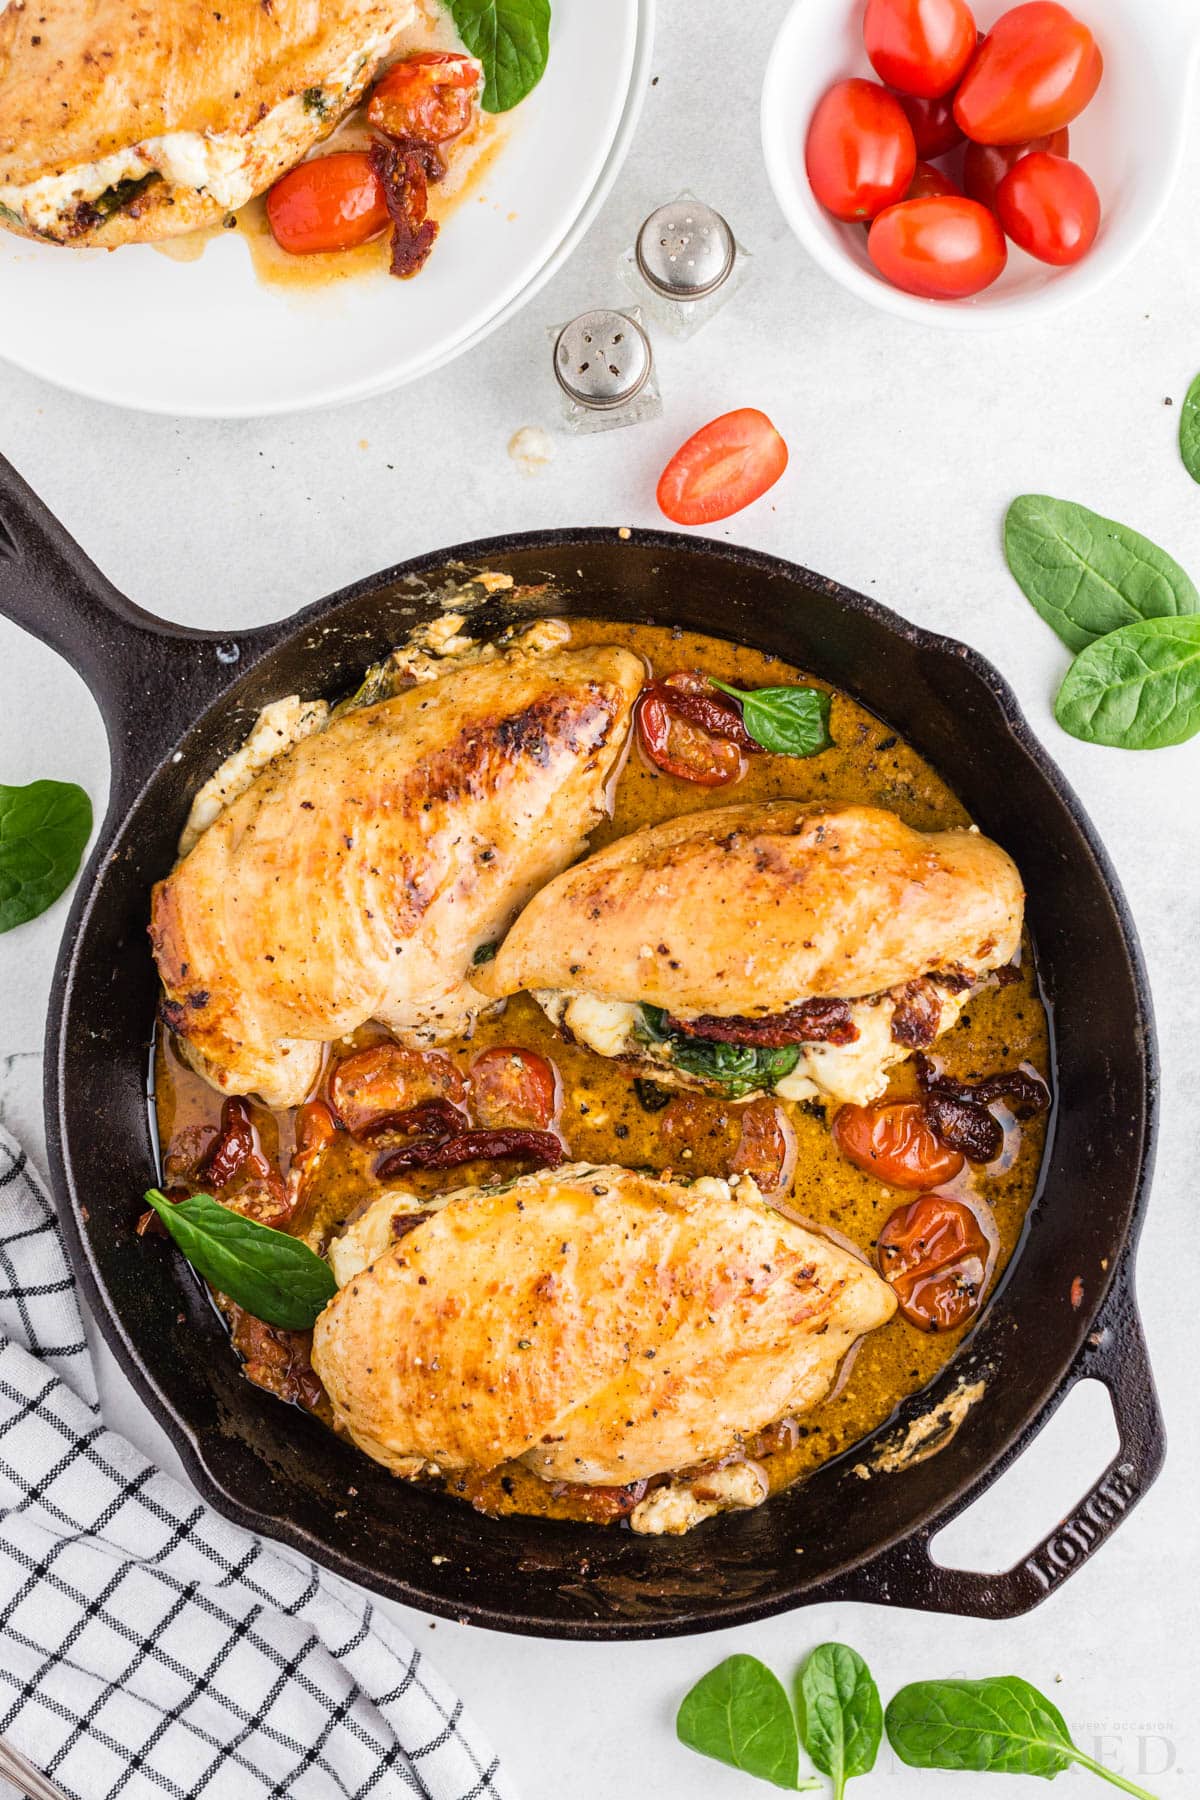 Chicken with sundried tomatoes and spinach in a cast iron skillet, checkered linen, plate with stuffed chicken breast, small bowl of tomatoes, salt and pepper shakers, on a marble countertop.